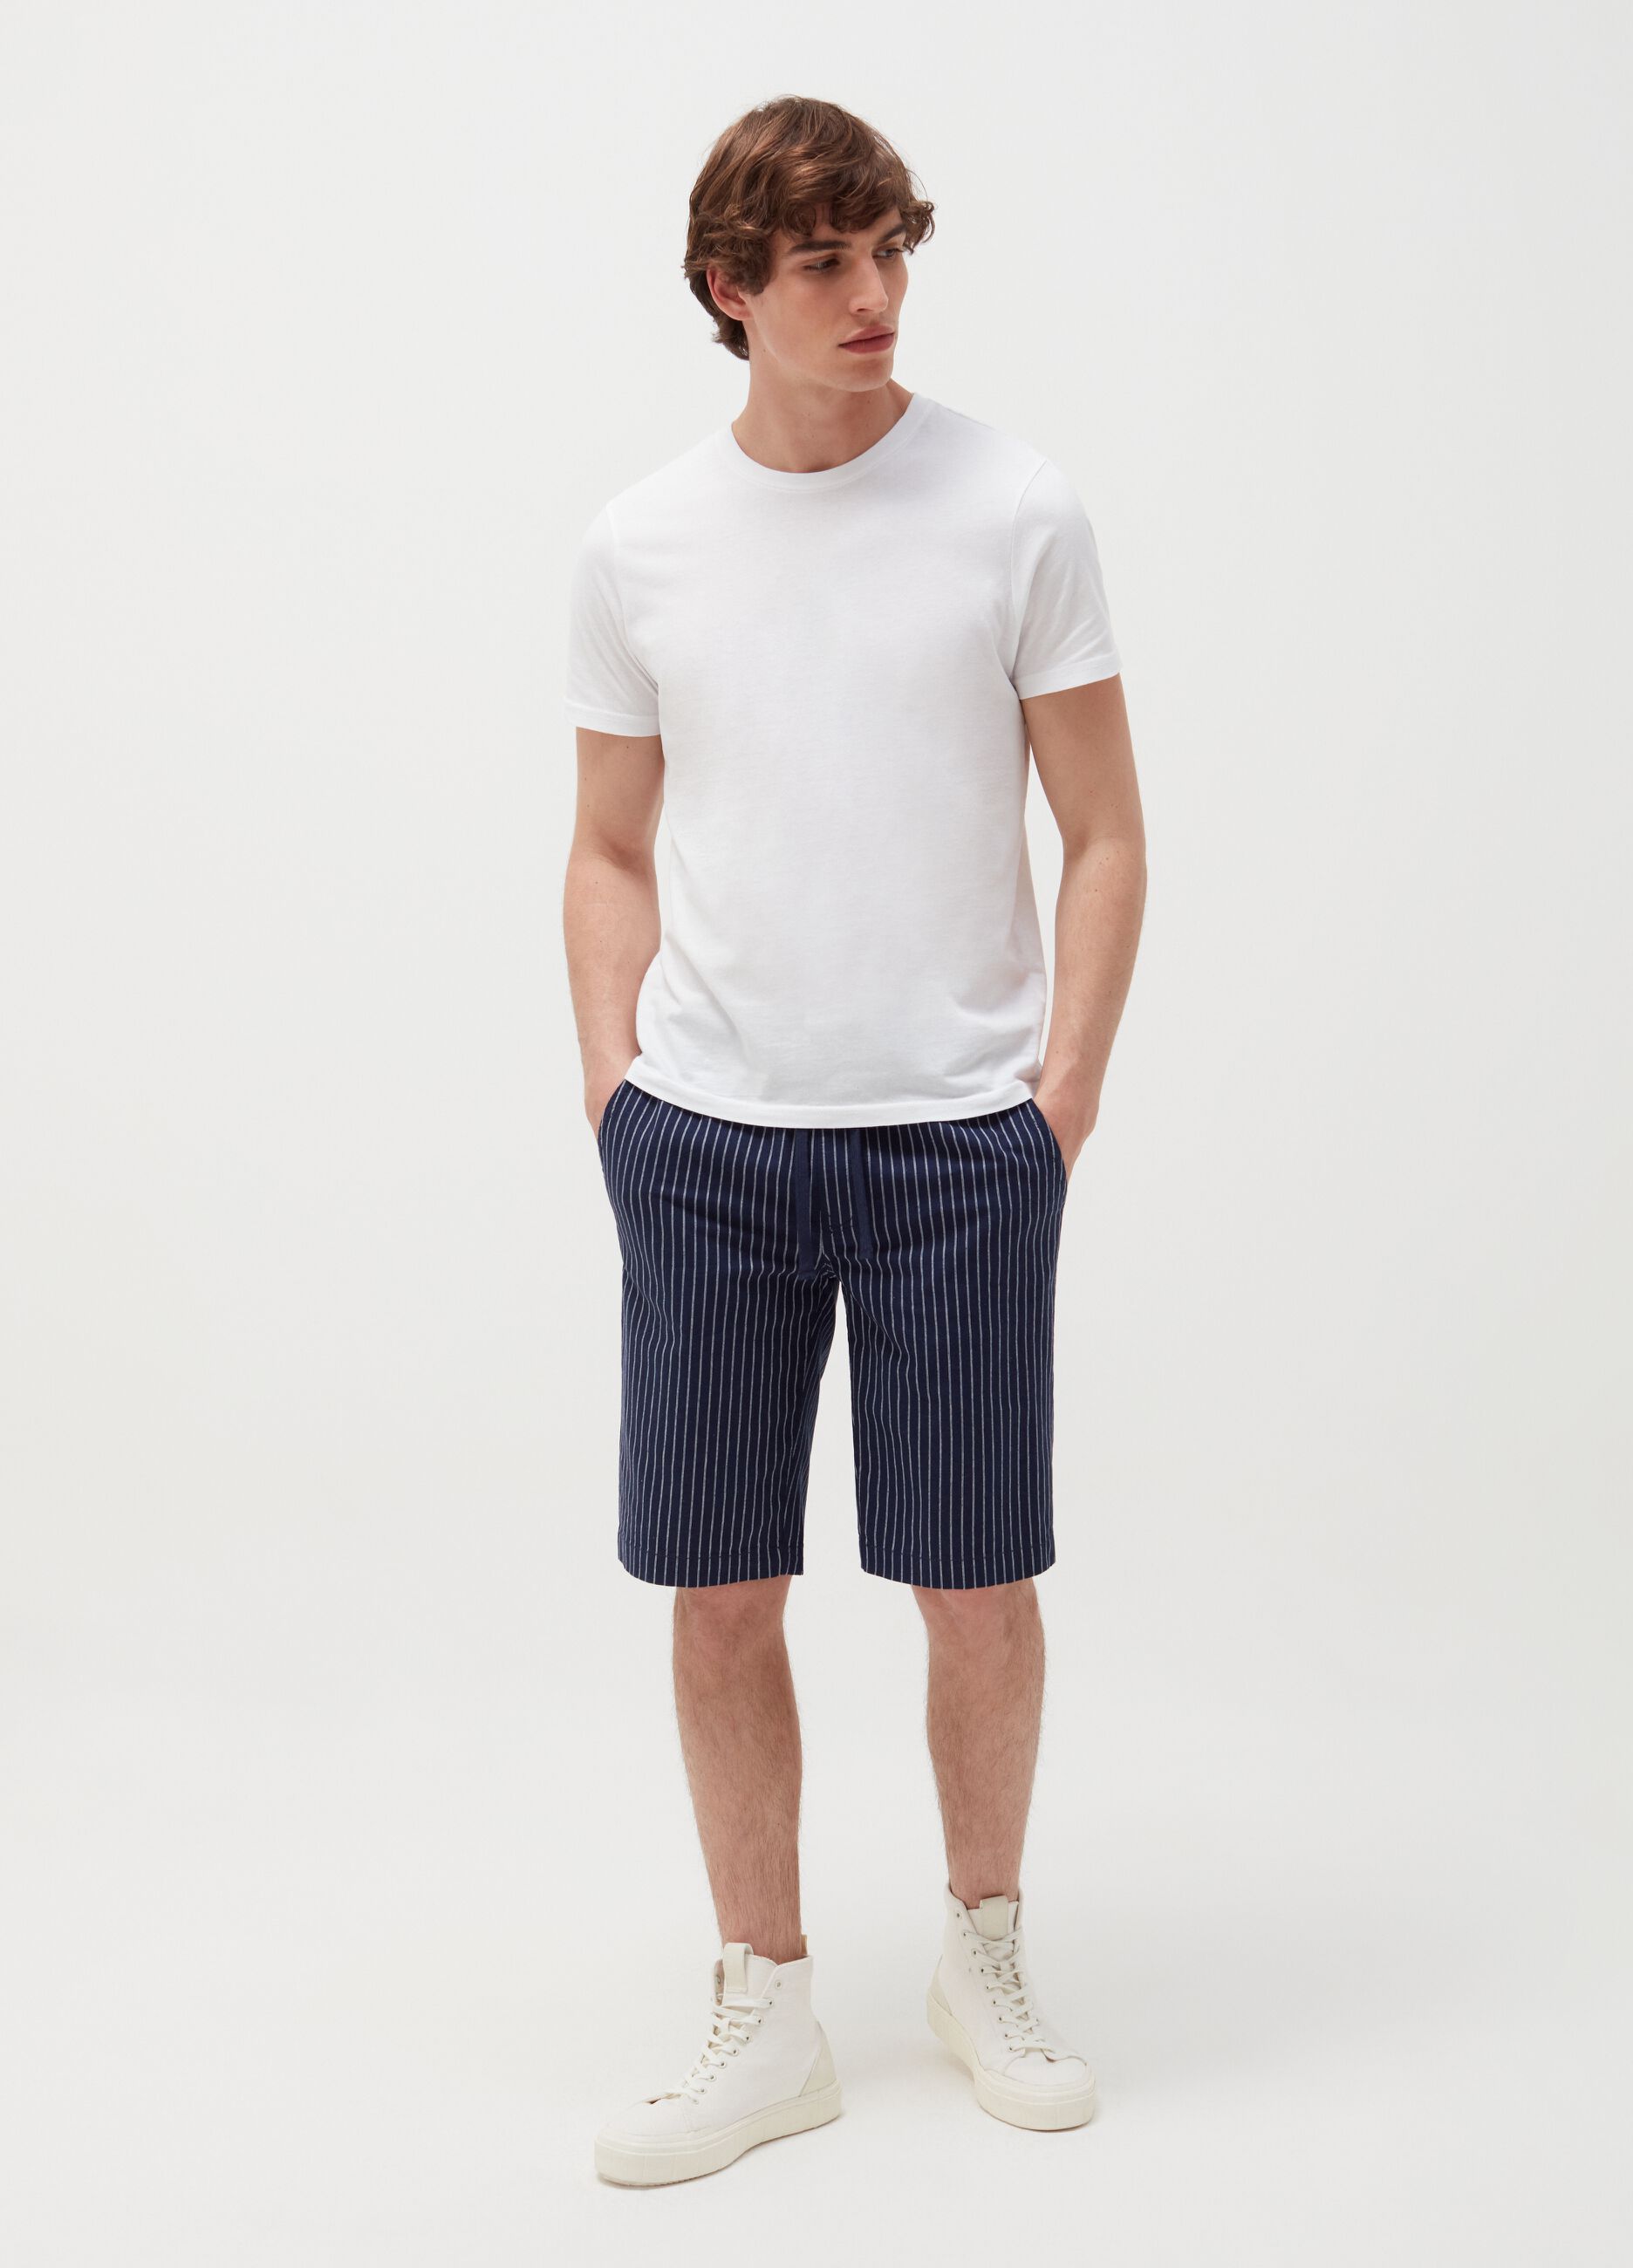 Striped Bermuda shorts in cotton and linen